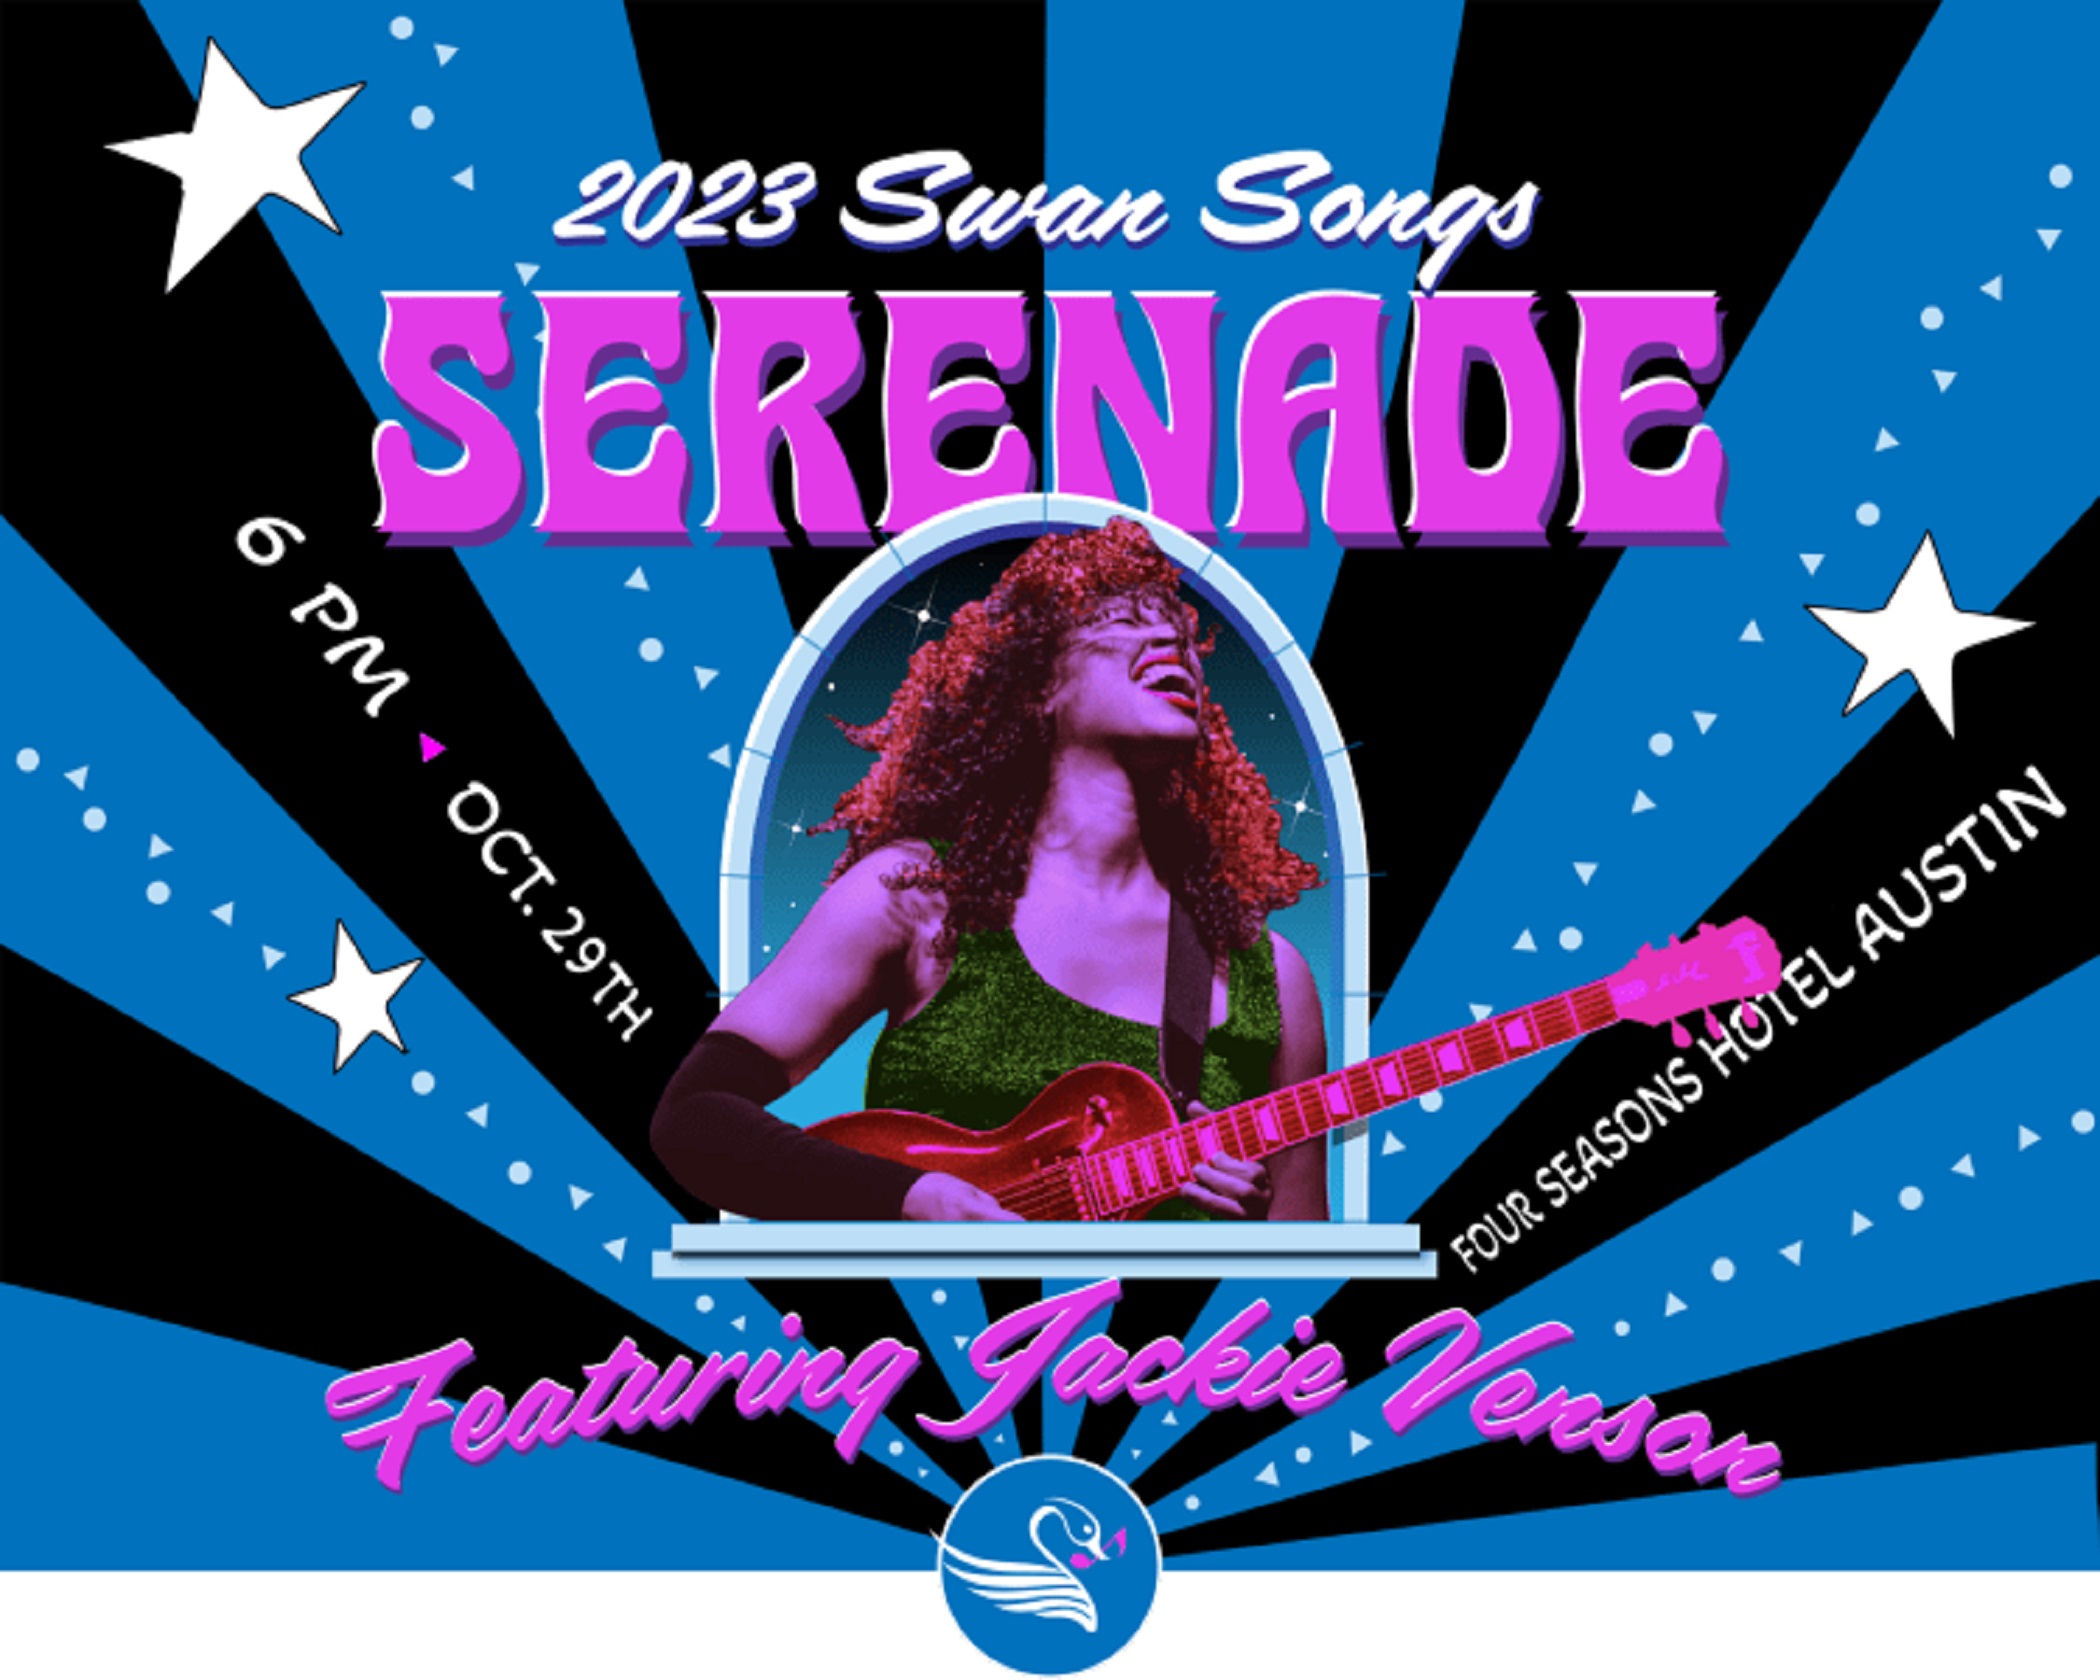 13TH ANNUAL SWAN SONGS SERENADE, A MAGICAL BENEFIT AND GALA TAKING PLACE OCT. 29 AT FOUR SEASONS HOTEL AUSTIN, FEAT. JACKIE VENSON